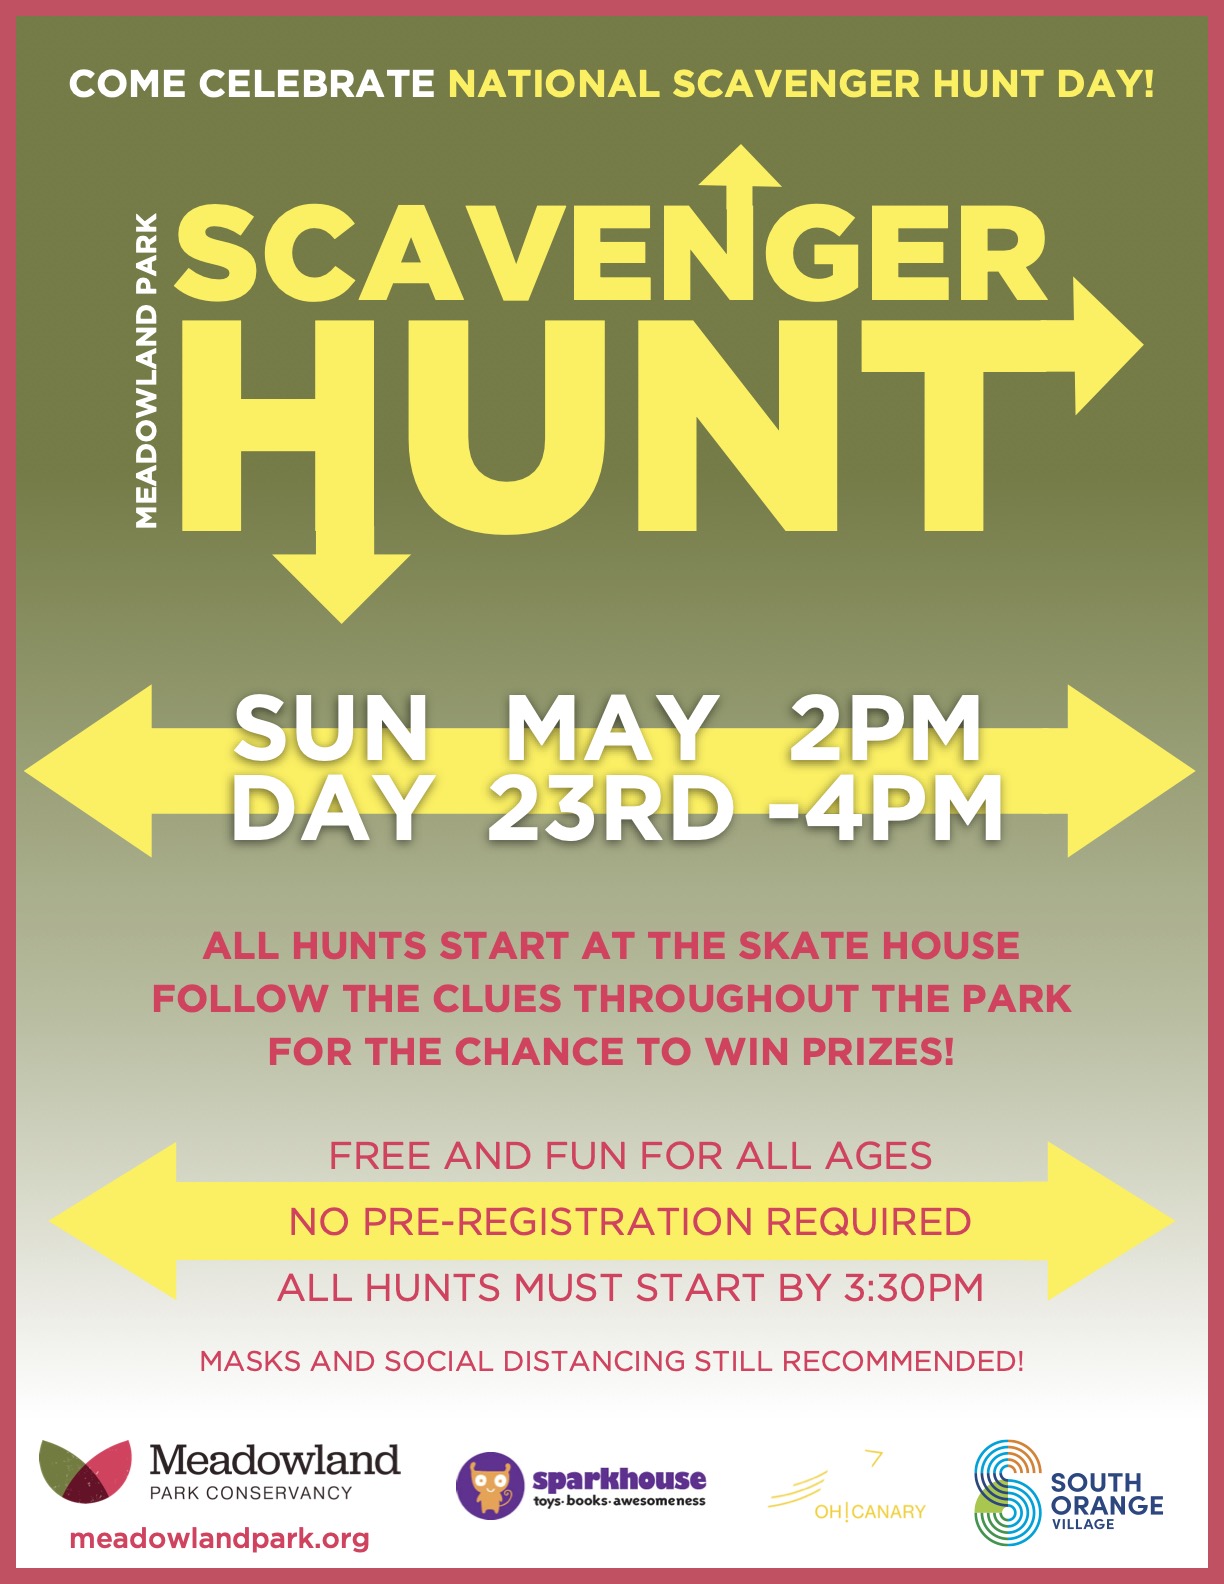 Meadowland Park Conservancy to Celebrate National Scavenger Hunt Day